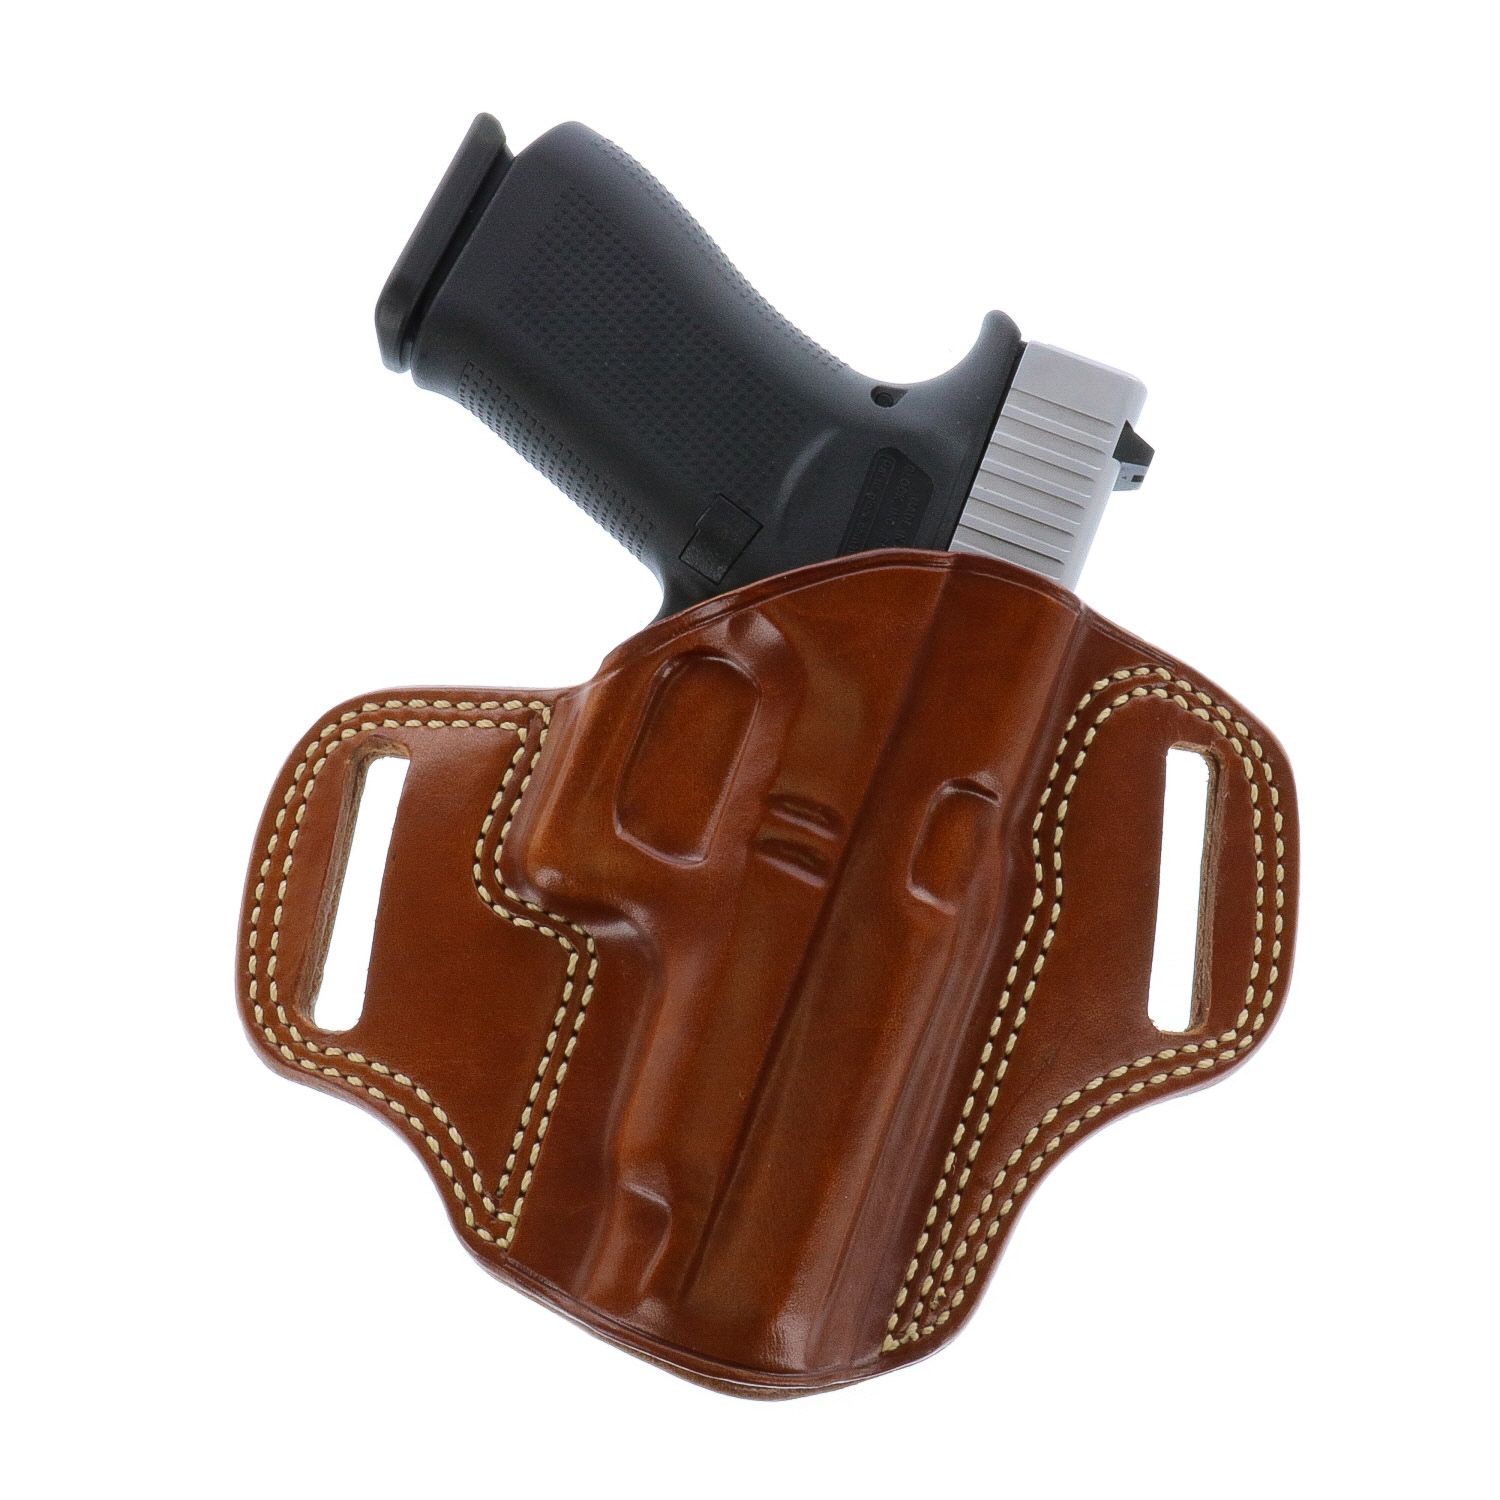 OWB Open Top Two Slot Belt Right Hand Leather Holster Fits Glock 43X 